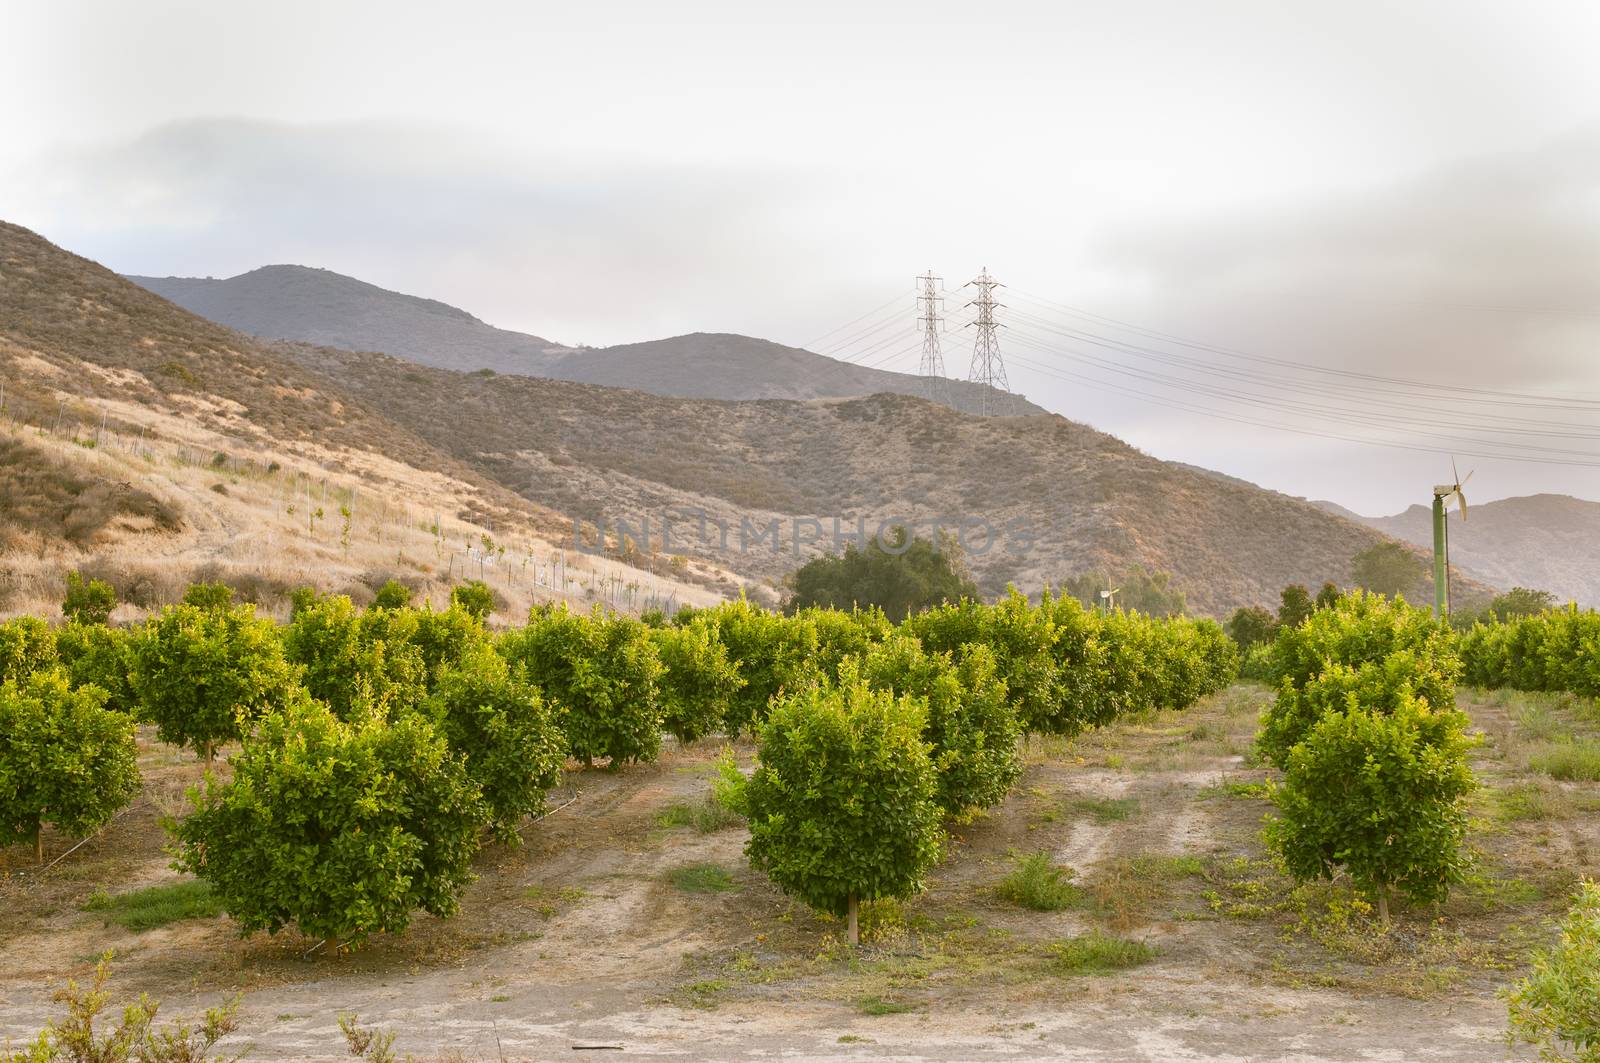 Citrus trees in an orchard in Southern California by Njean